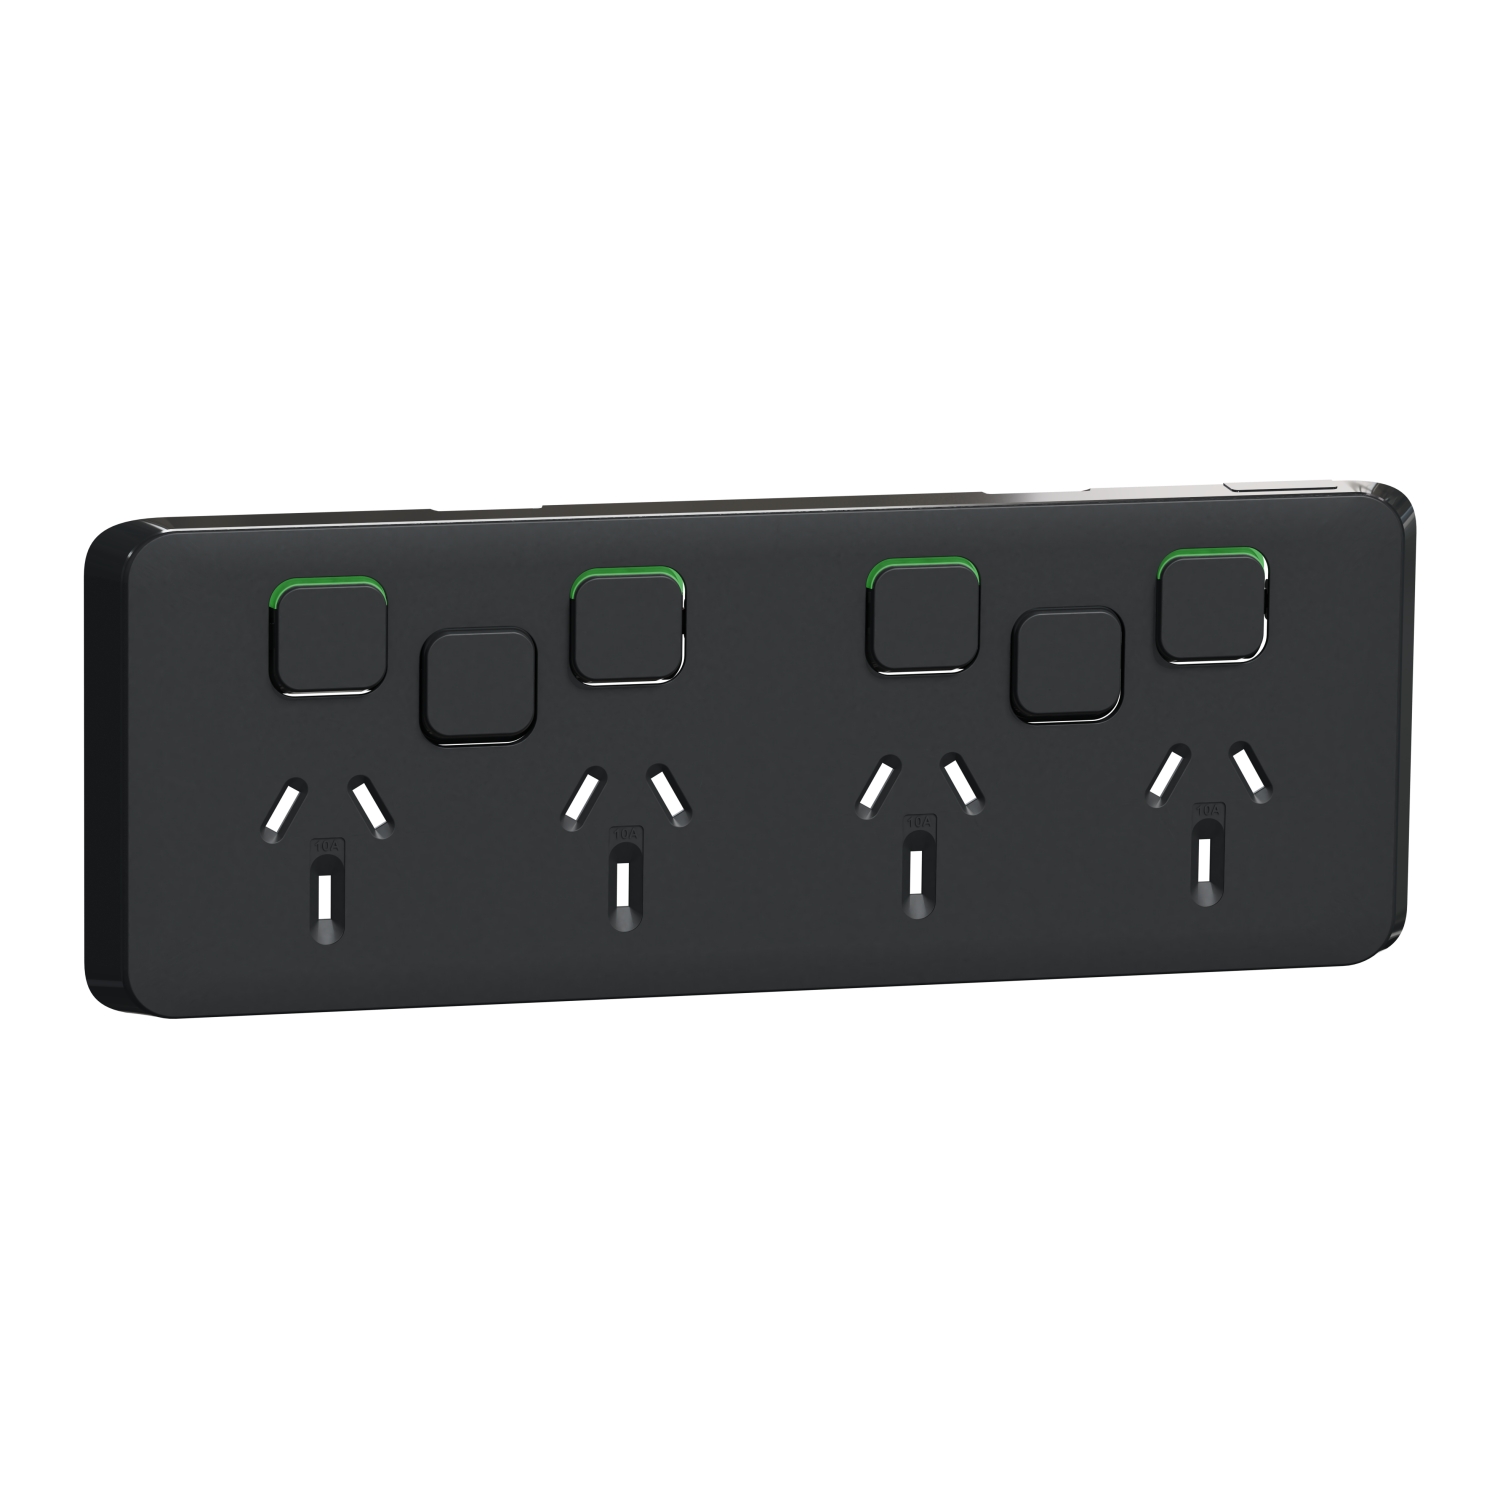 PDL Iconic - Cover Plates Quad Switched Socket 10A + 2 Switches - Solid Black